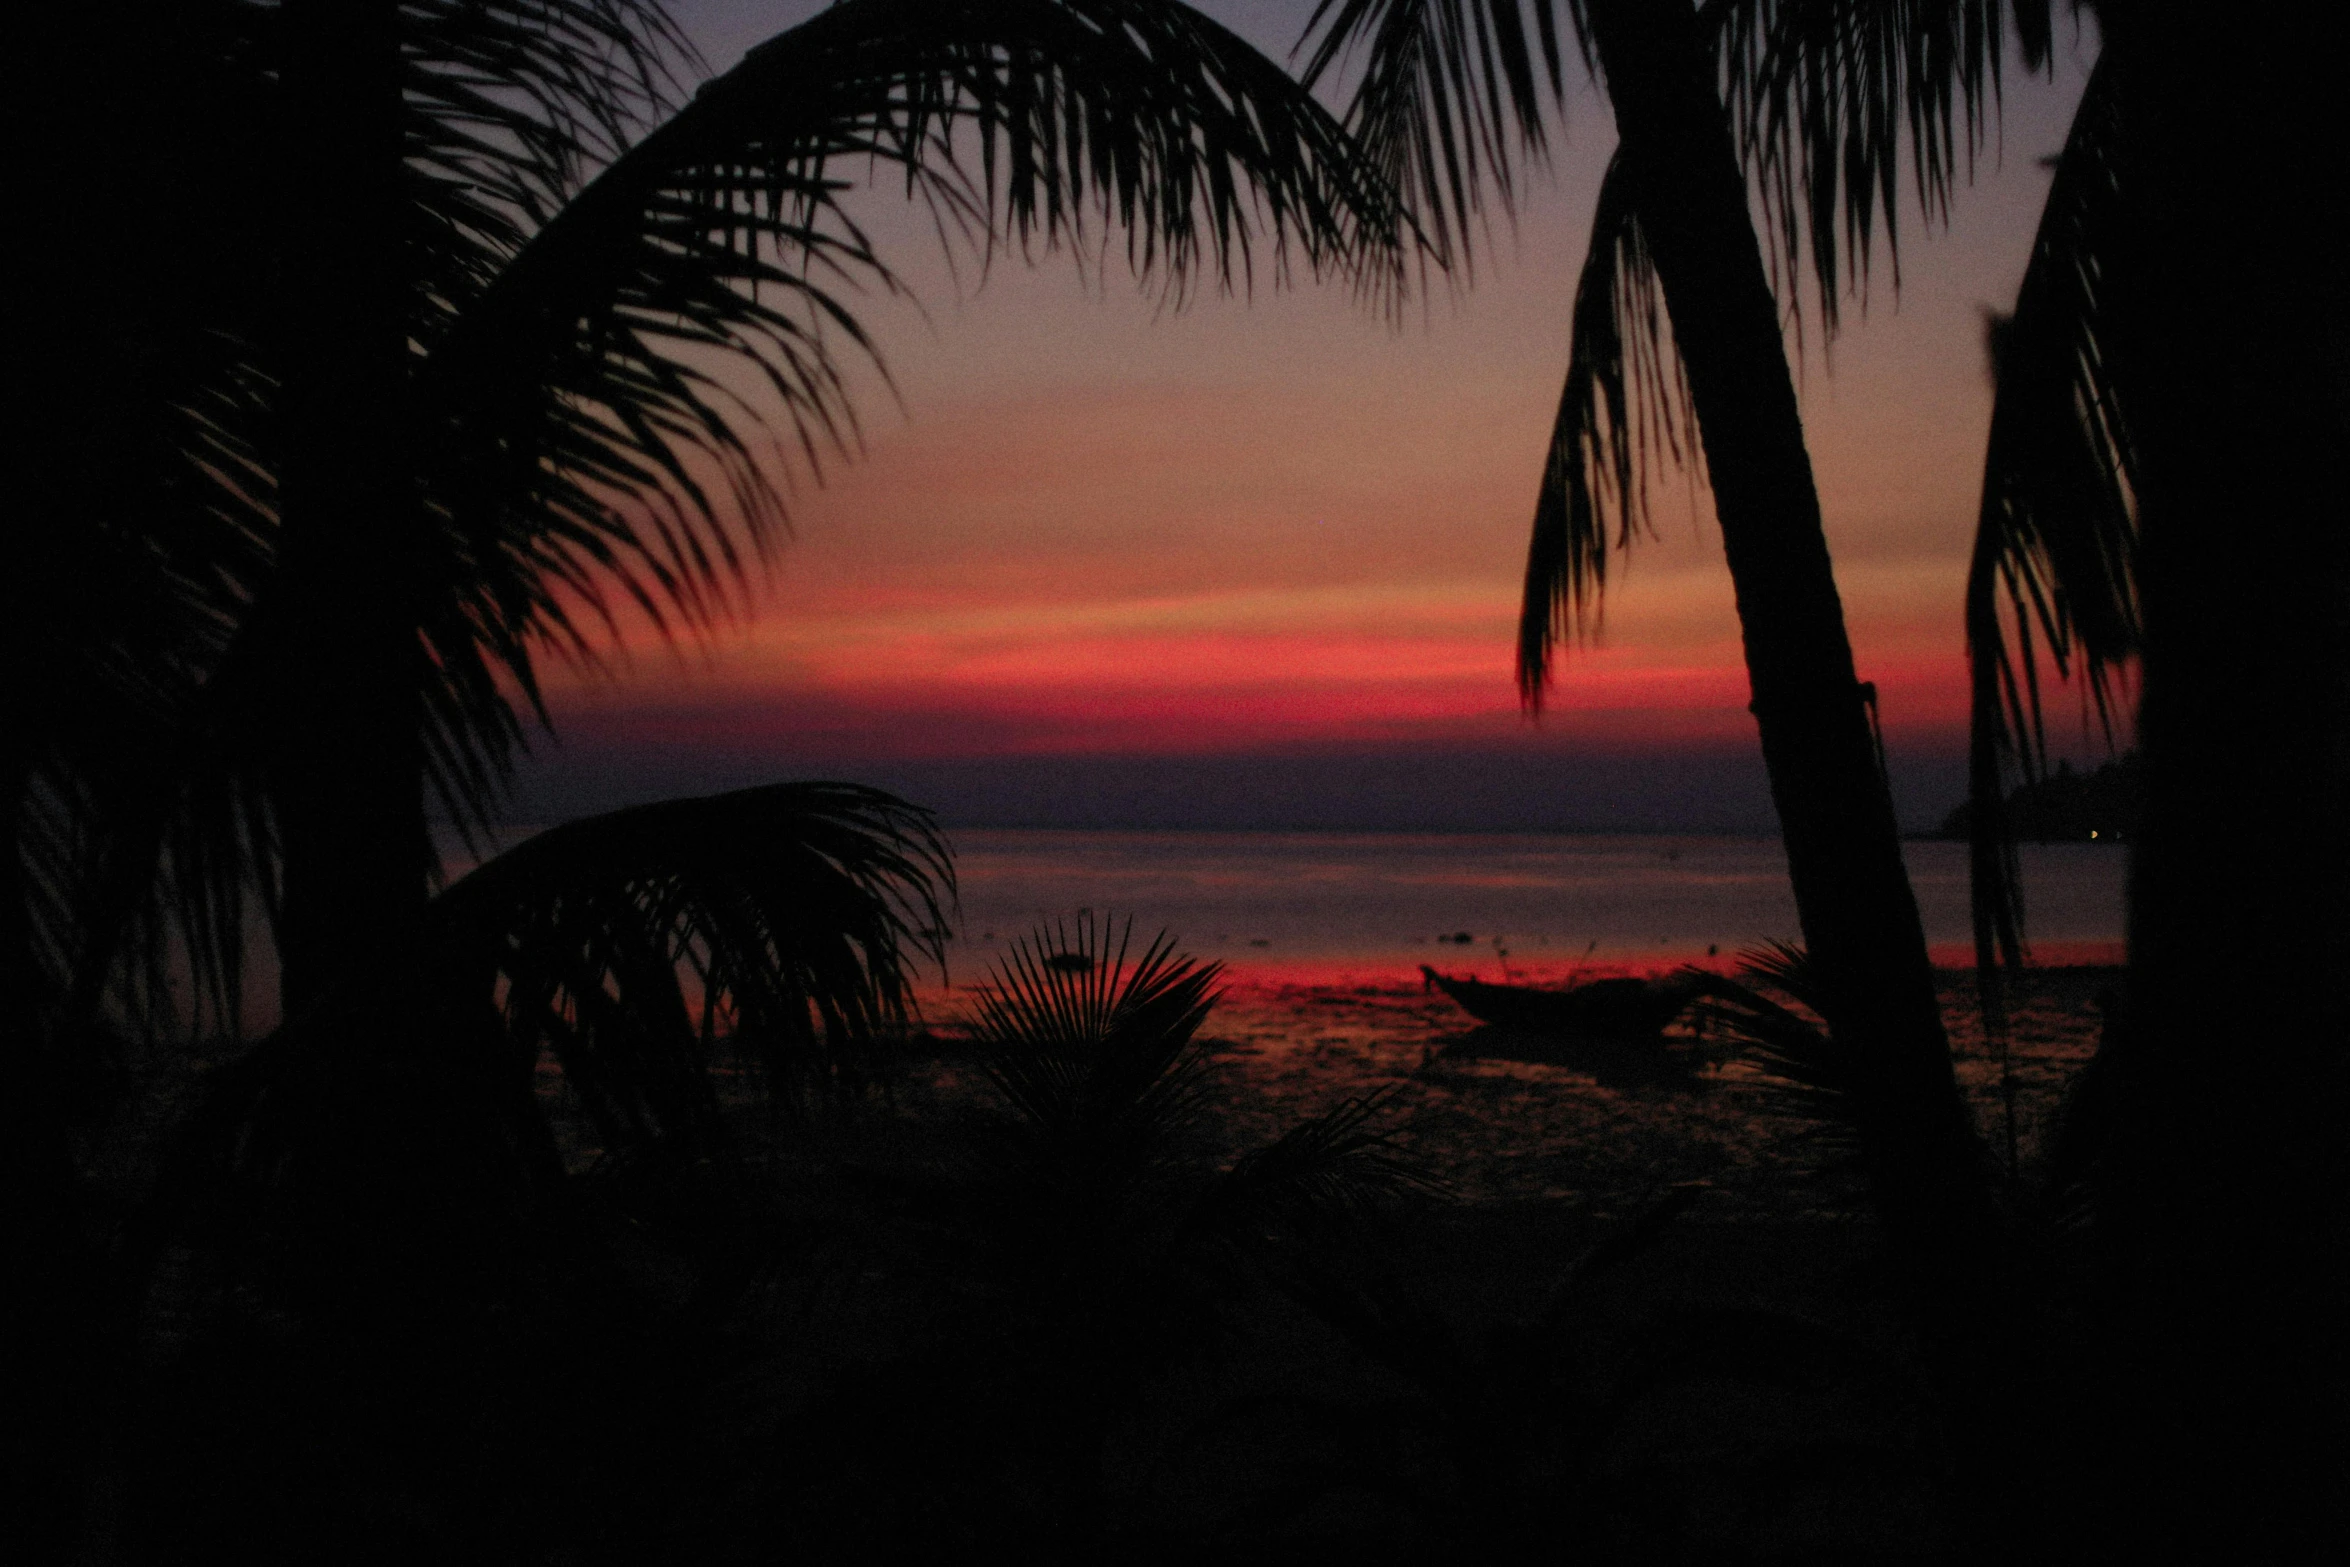 a sunset on the beach with palm trees in the foreground, pexels contest winner, romanticism, red glow in sky, thawan duchanee, taken in the late 2000s, photo on iphone